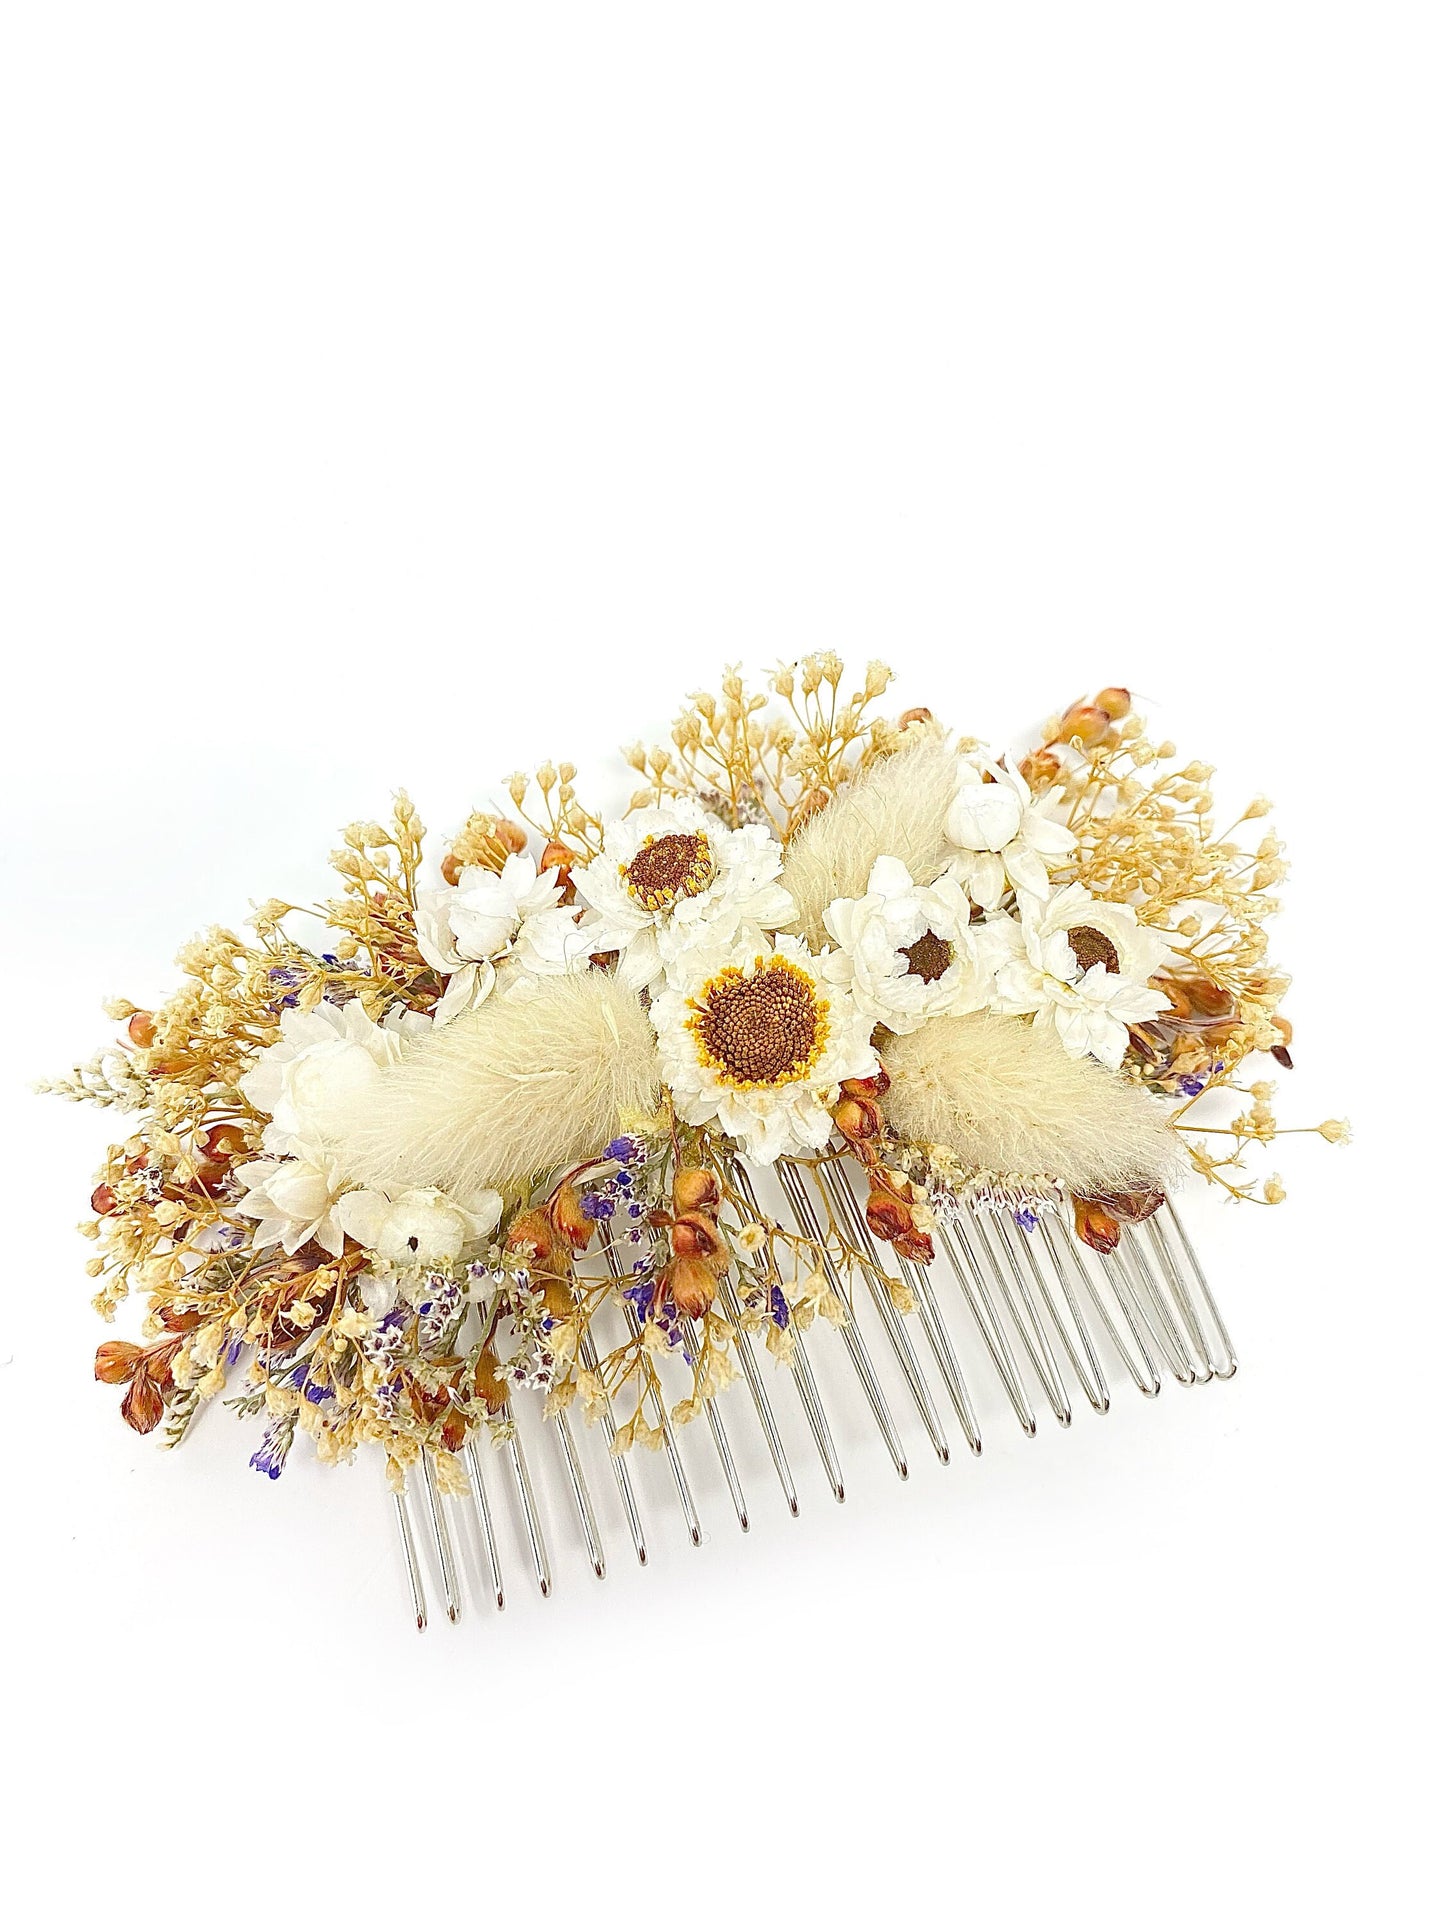 Hair Comb, Dried Flowers, Hair Pins, Bridal, Hair Accessories, Wedding Accessories, Ammobium, Bunny Tails, Preserved Floral, Caspia